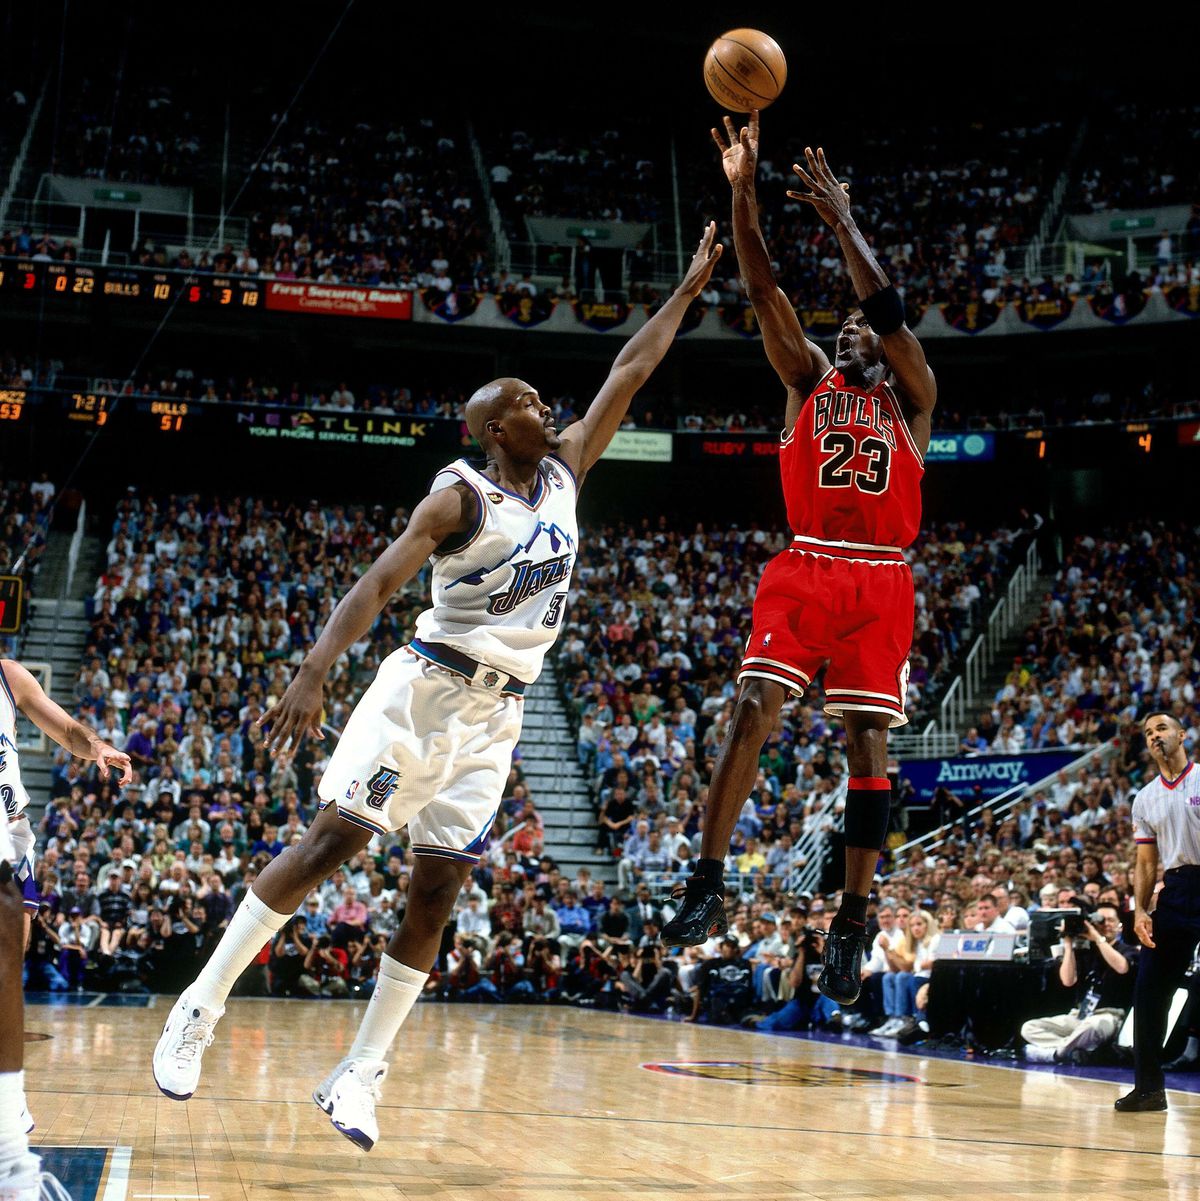 Michael Jordan shoots a jump shot against Bryon Russell in Game 6 of the 1998 NBA Finals